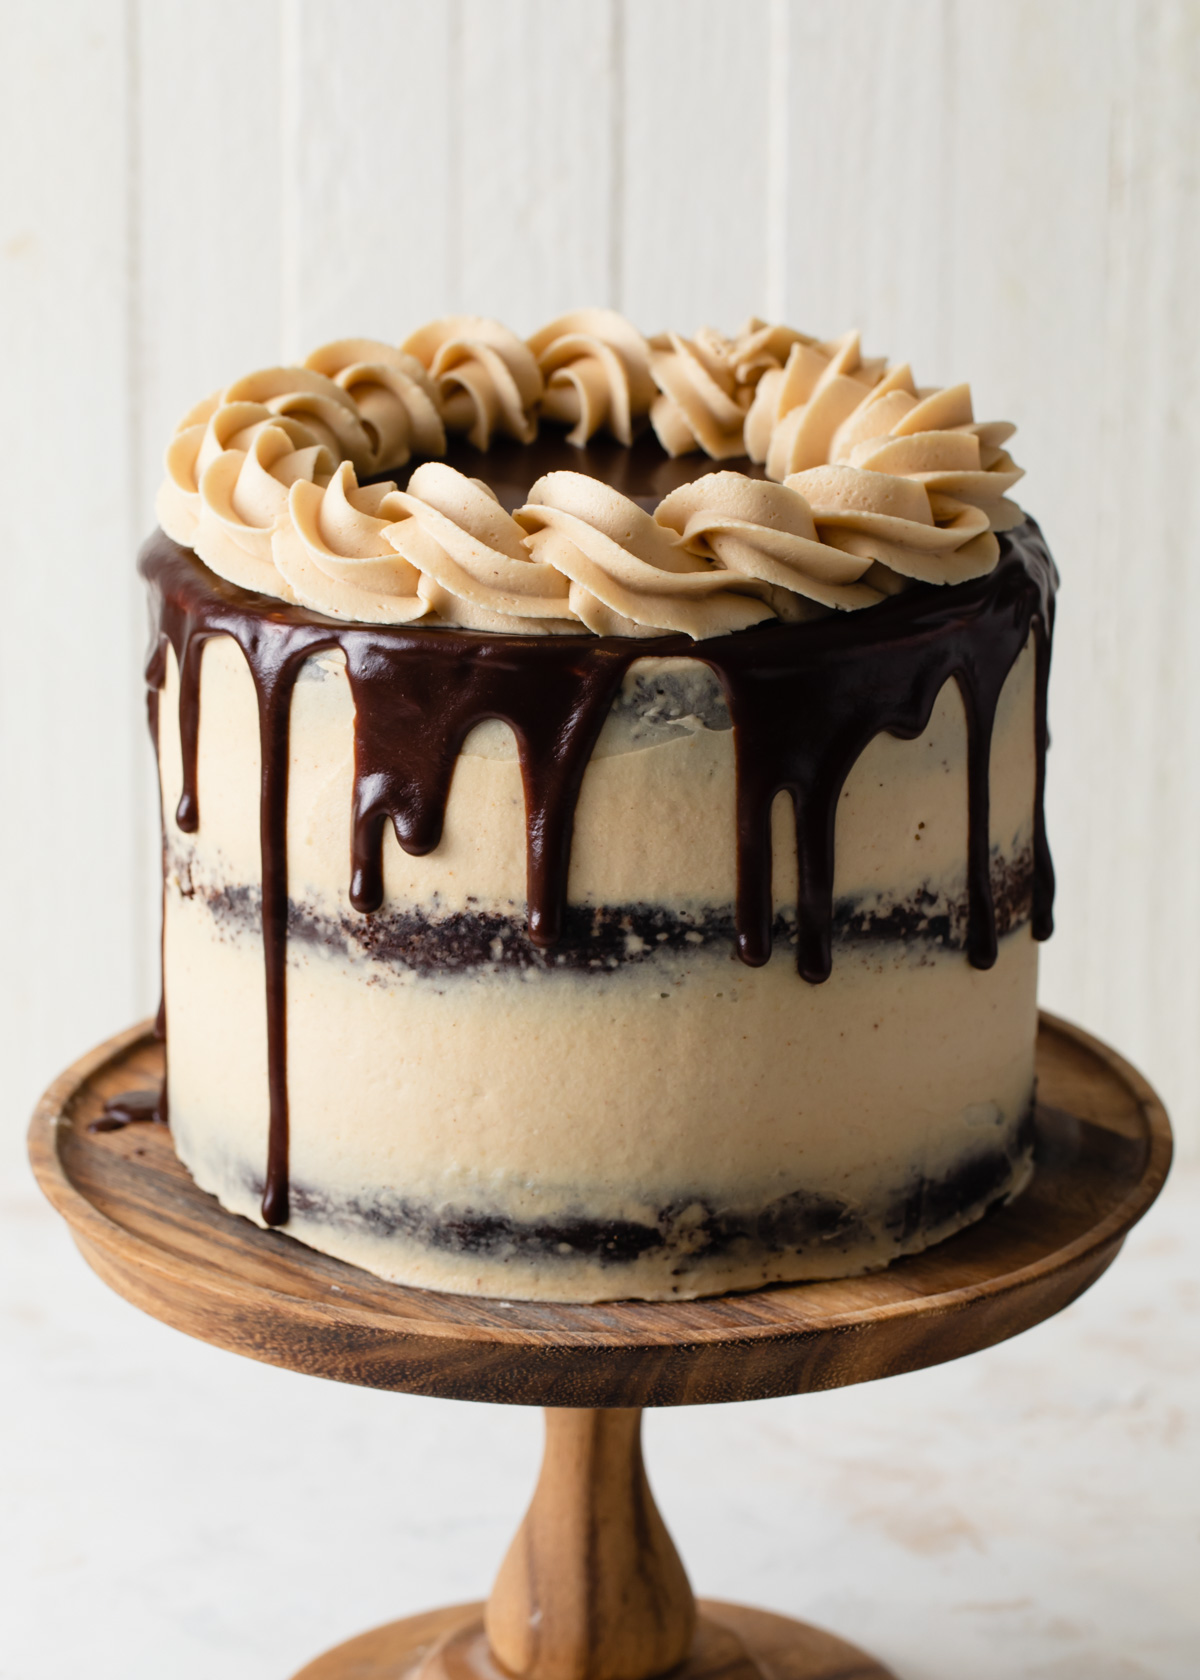 A three-layer chocolate cake with peanut butter frosting on a cake pedestal